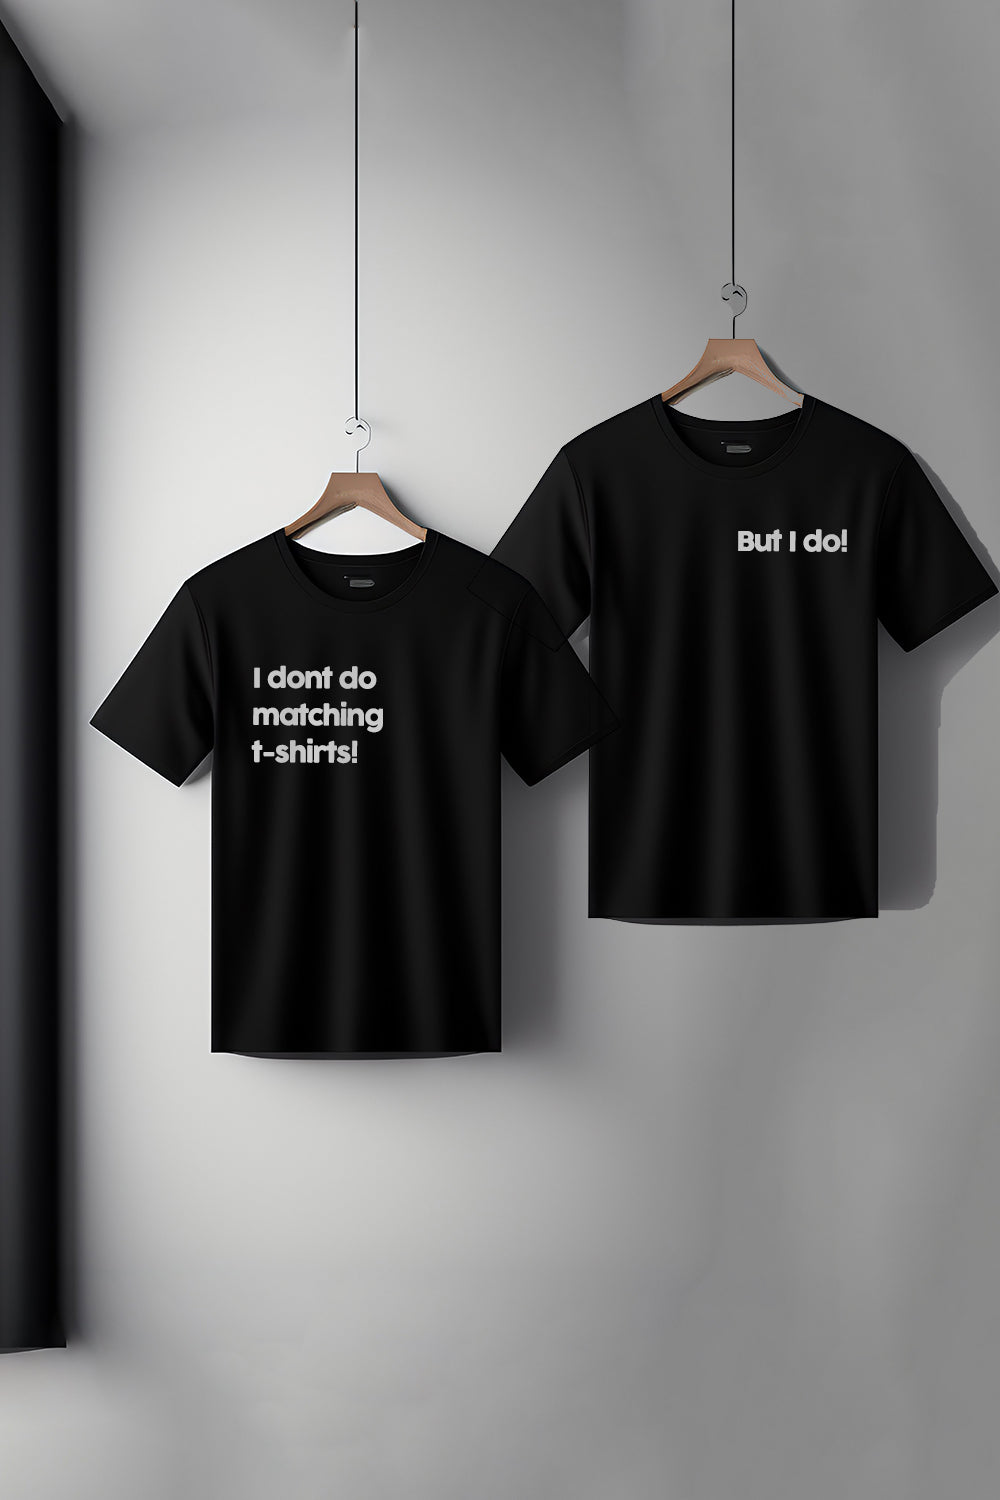 one-day-delivery-t-shirts